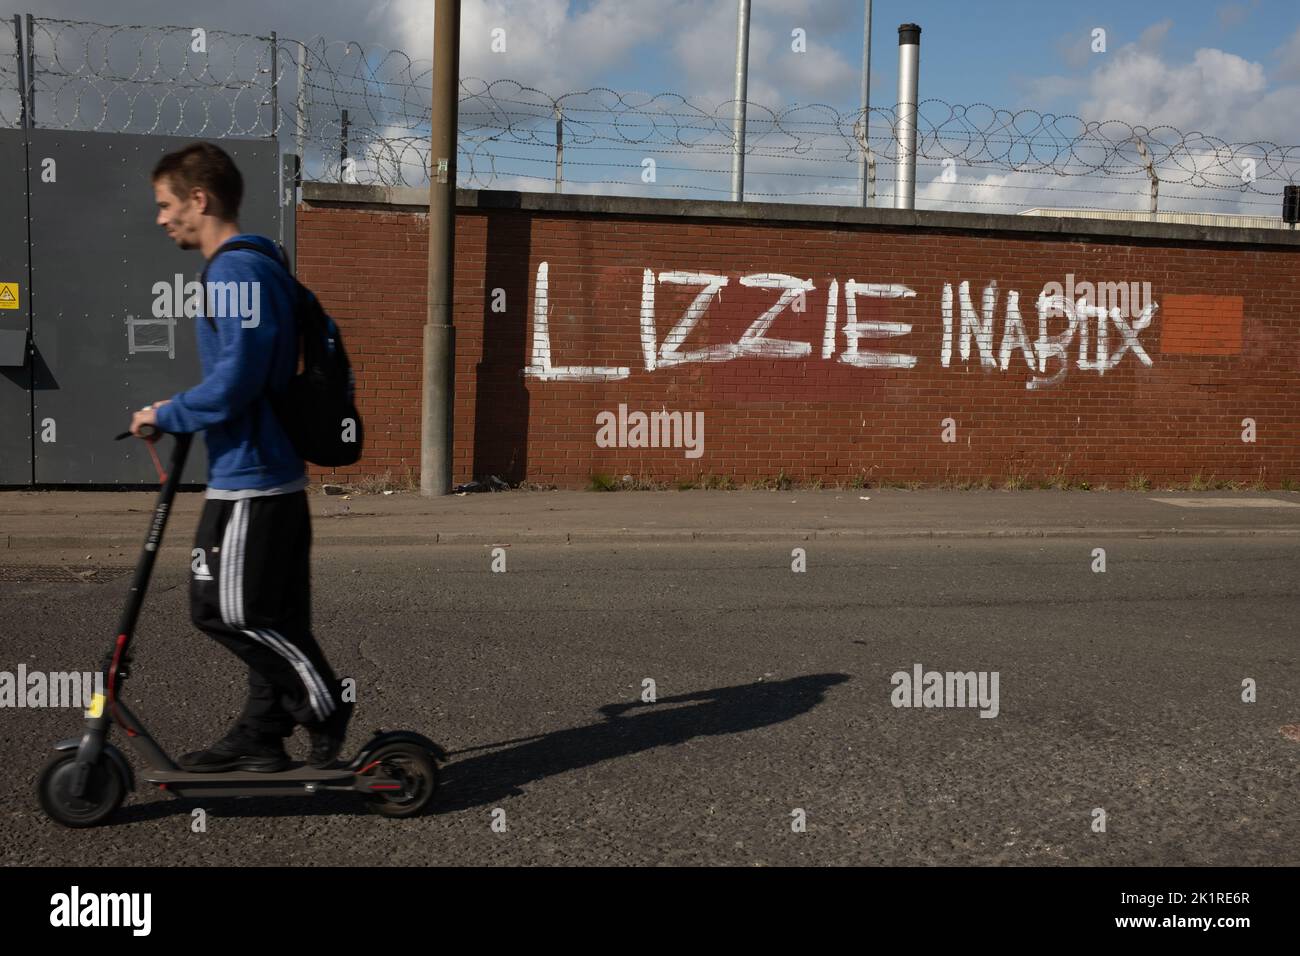 Glasgow Scotland, 20 September 2022. Anti-monarchy graffiti reading “Lizzie in a box”, which appeared overnight in the Ibrox area of the city, on the day after the funeral of Her Majesty Queen Elizabeth II who died on 8th September, in Glasgow Scotland, 20 September 2022. Photo credit: Jeremy Sutton-Hibbert/Alamy Live News. Stock Photo